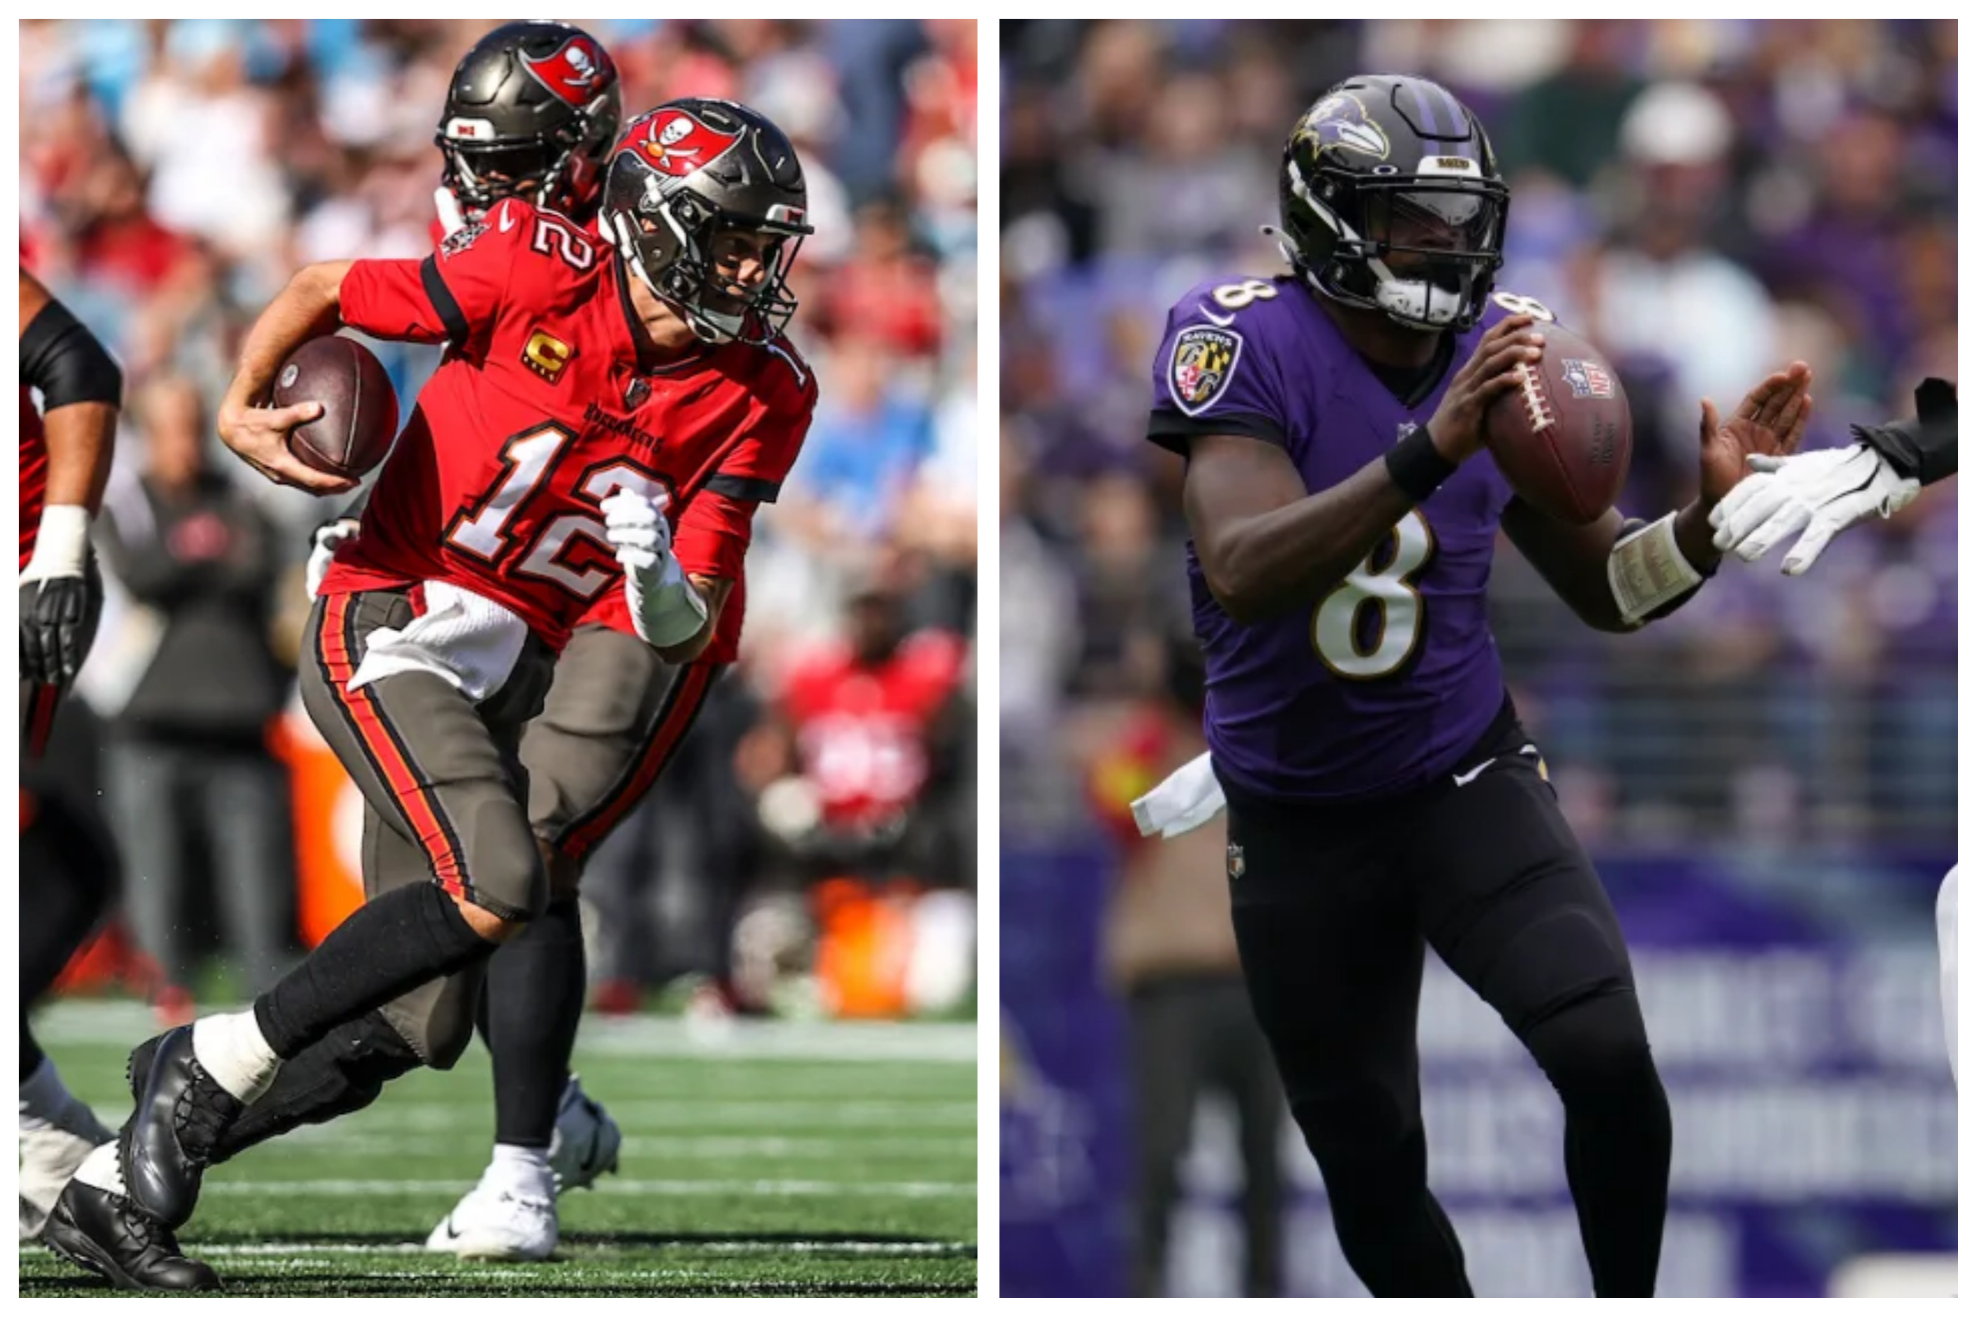 the buccaneers and the ravens